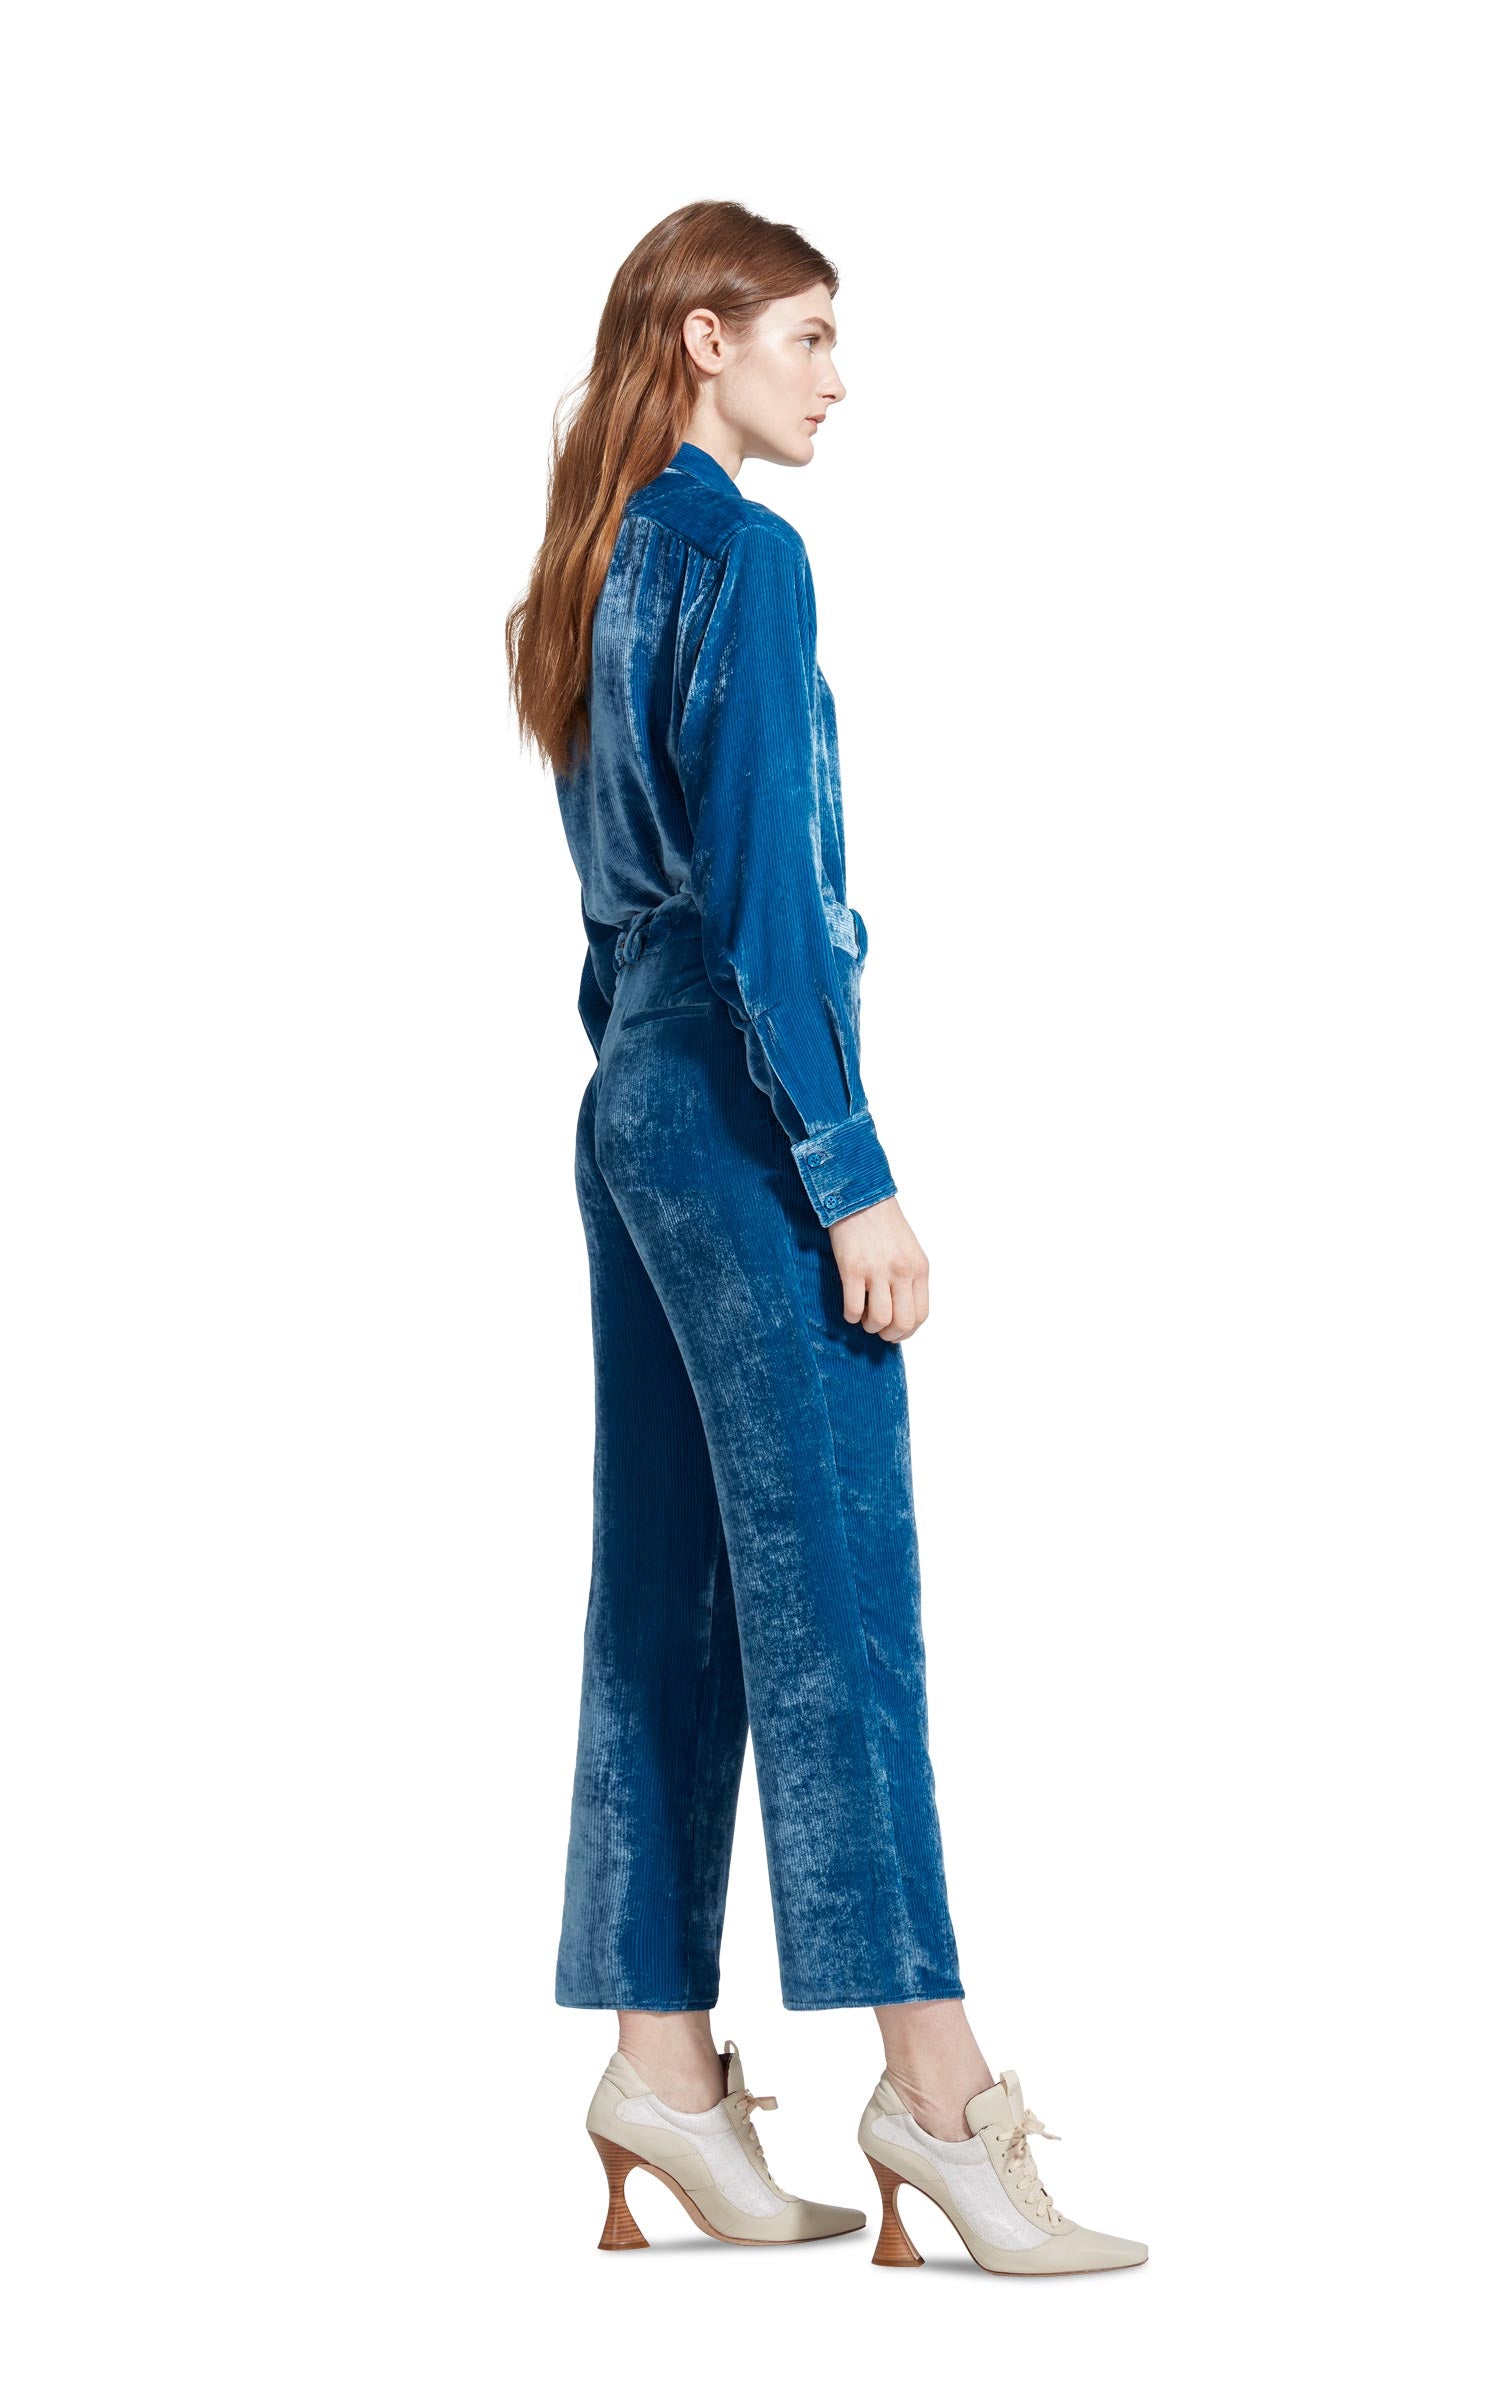 Willa Fluid Corduroy Cropped Pant